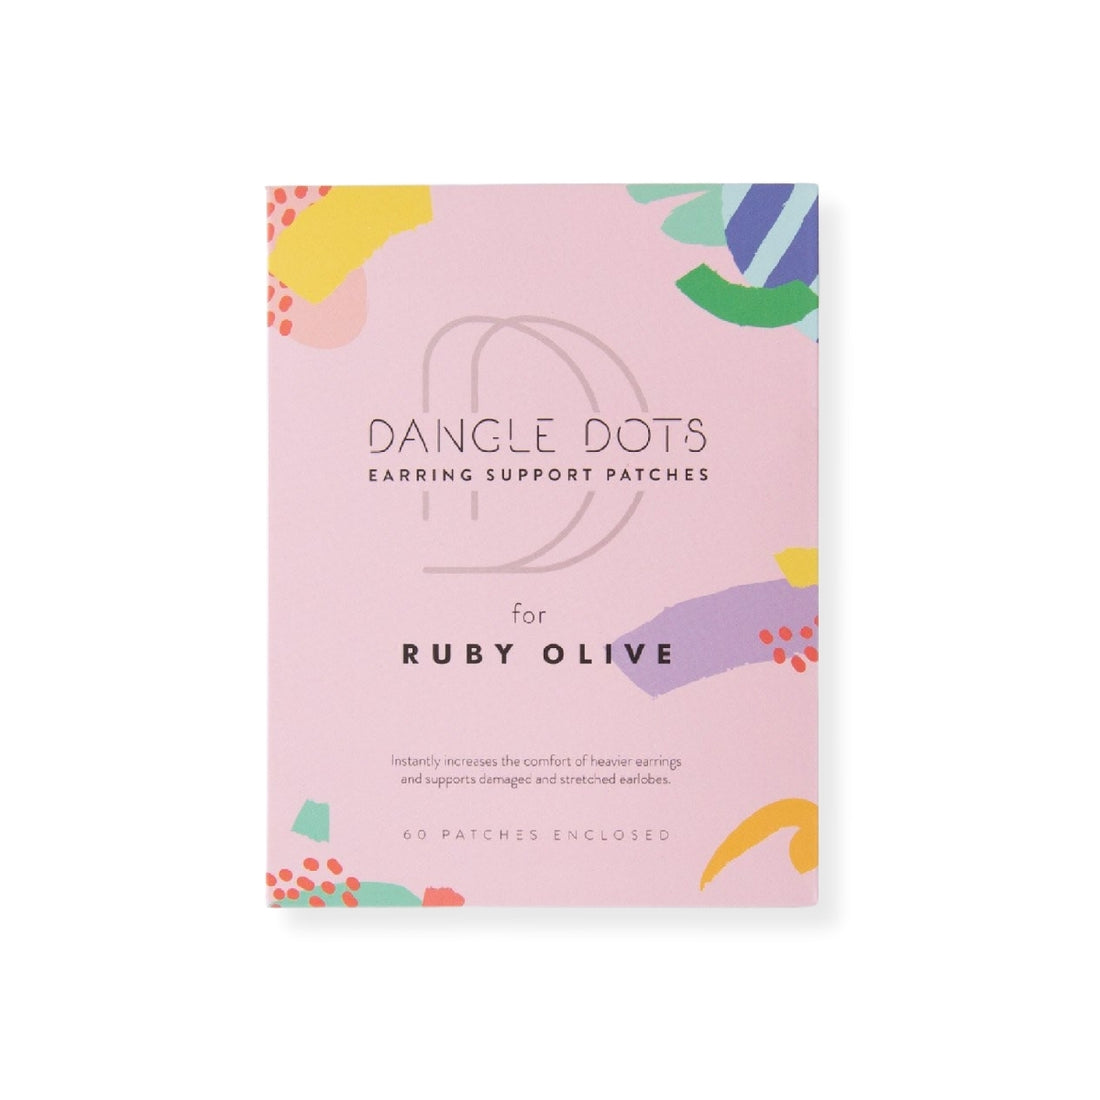 Dangle Dots Support Patches